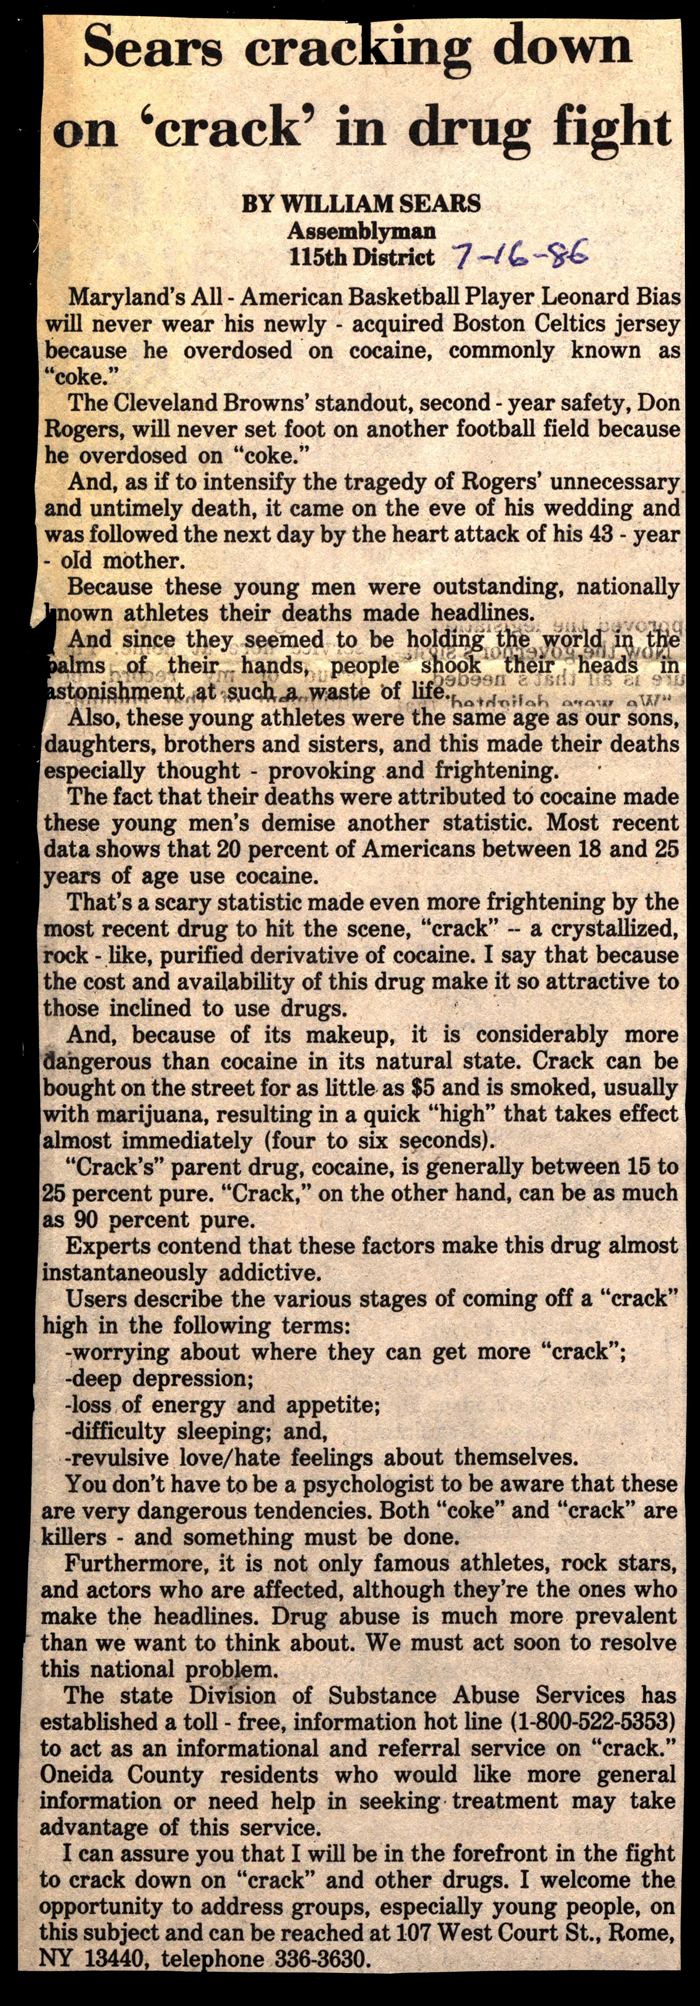 sears cracking down on crack in drug fight july 16 1986